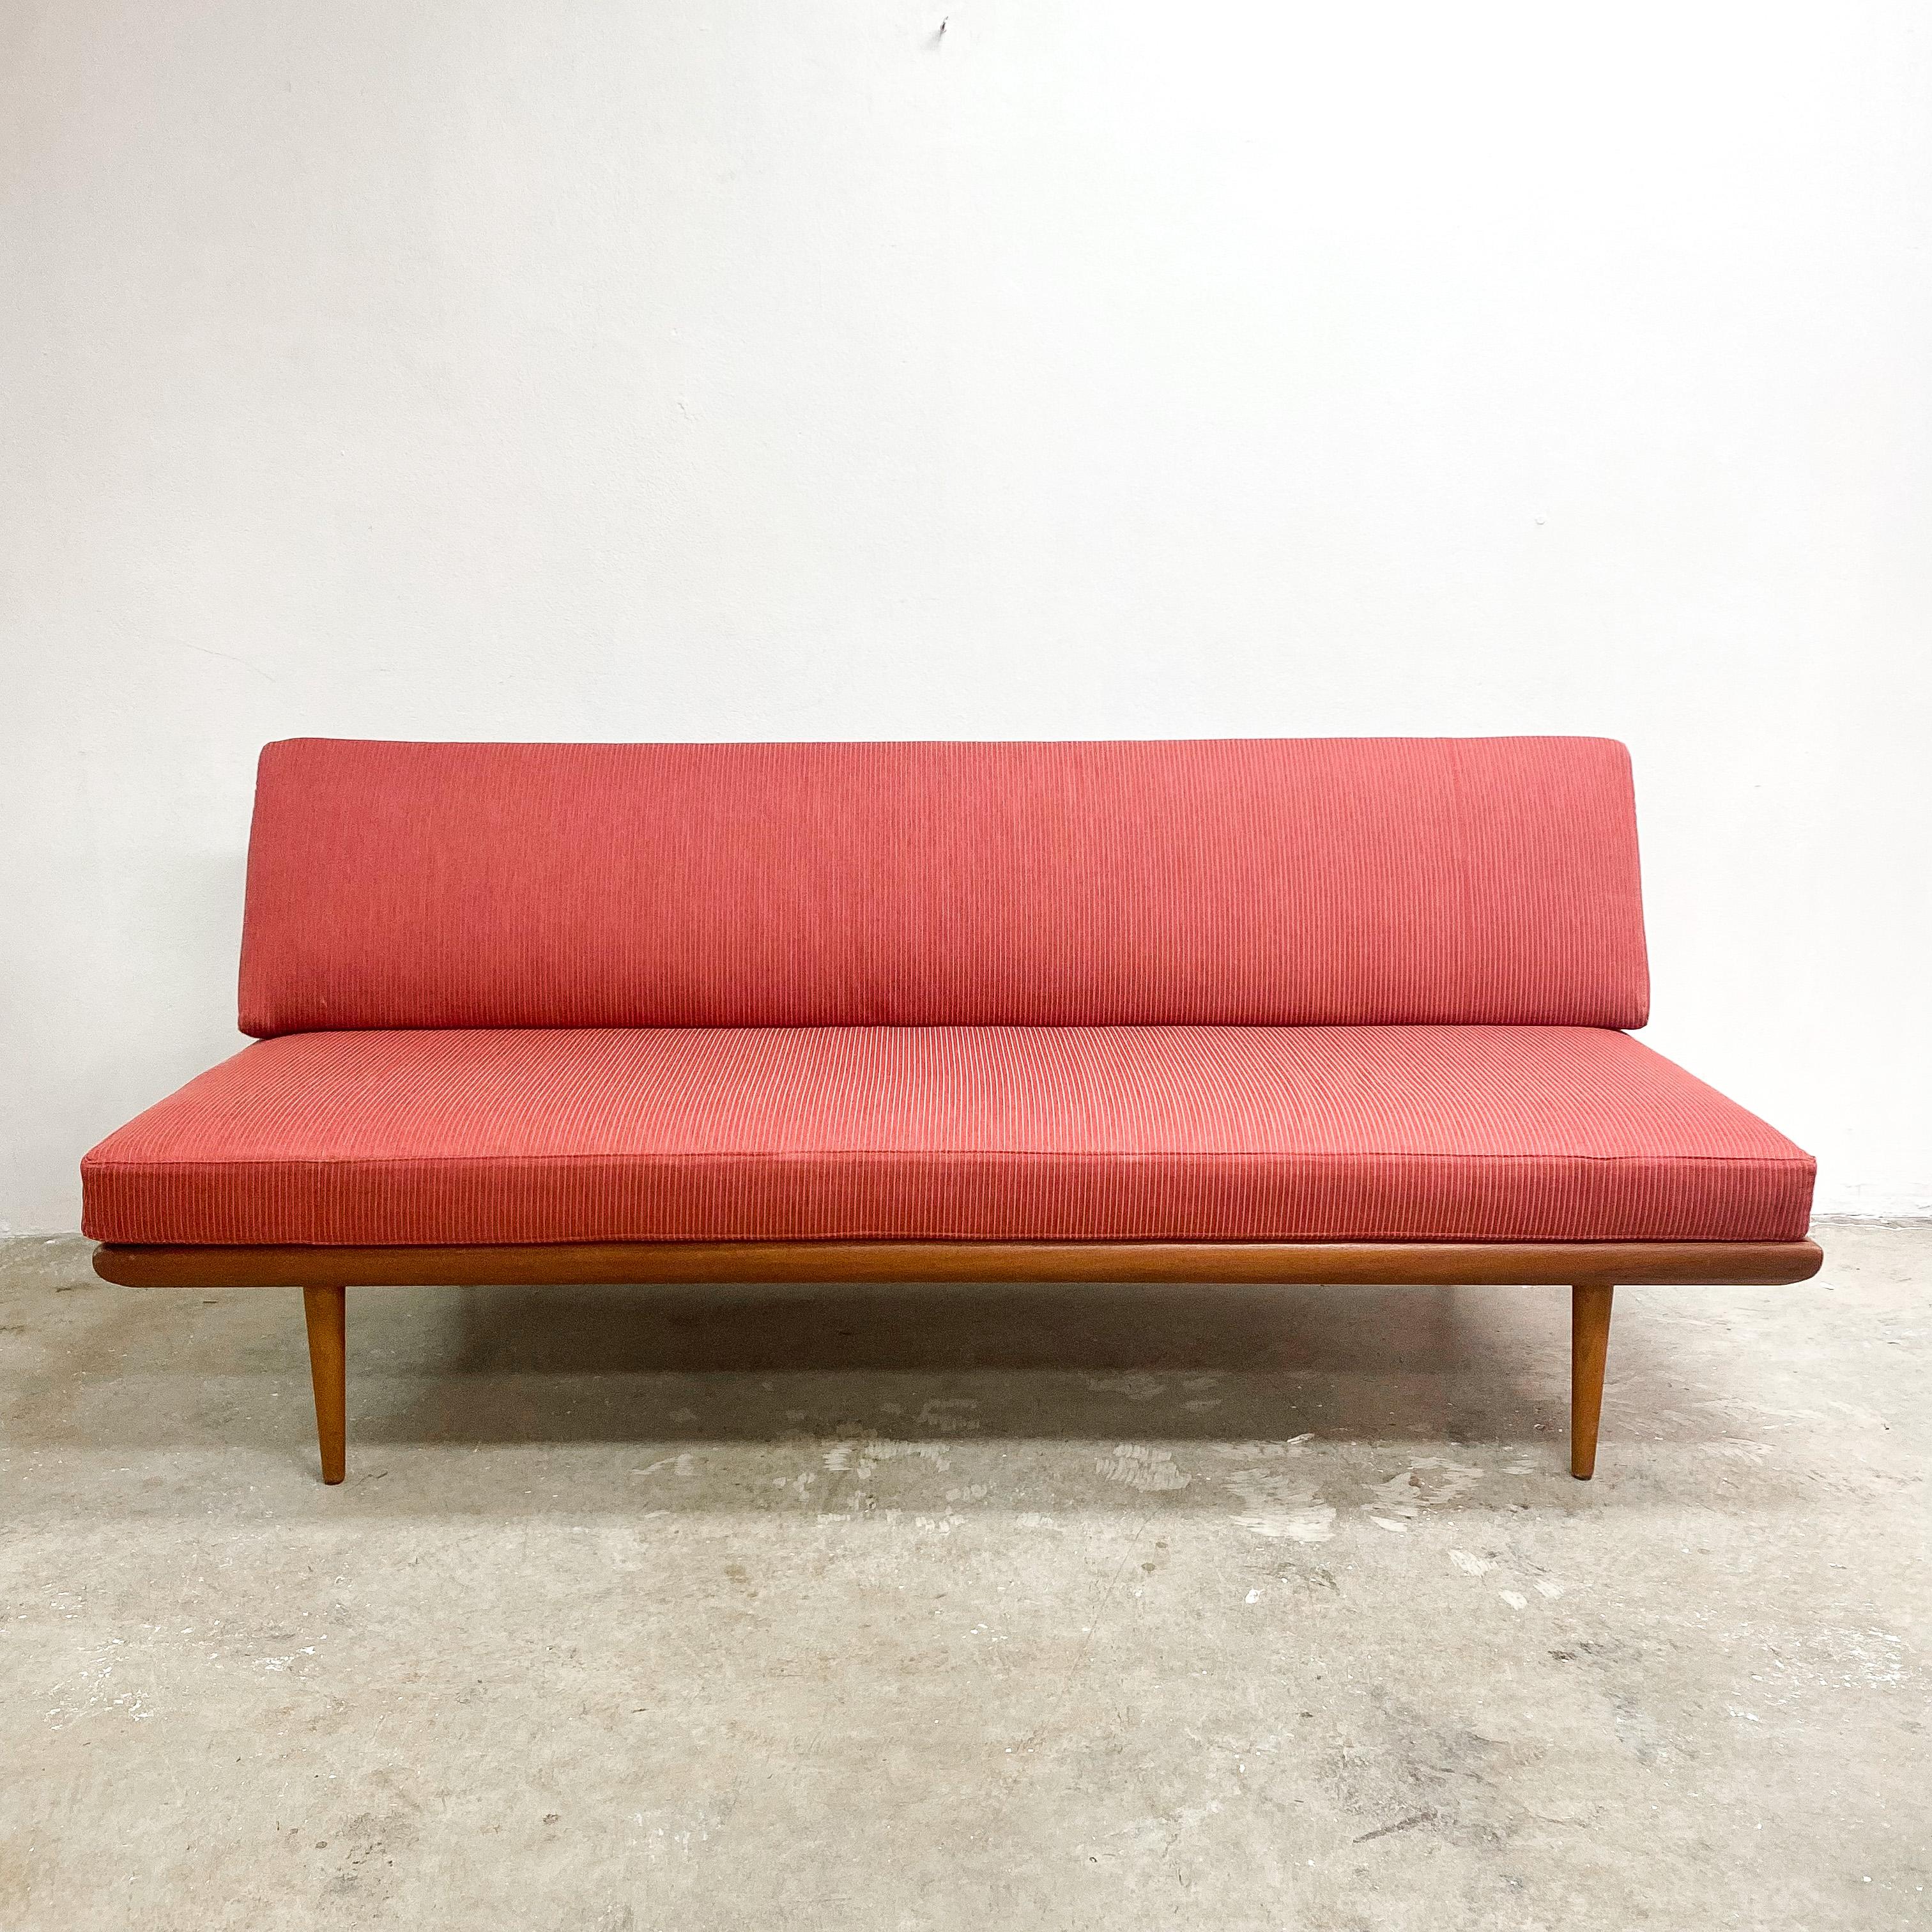 Danish 'Minerva' Daybed Sofa Lounge Peter Hvidt & Orla Molgaard Nielsen for France and Sons. Designed and produced in the 1960s this design classic is named after the god of wisdom and art.
The condition is very good, it has been reupholstered at